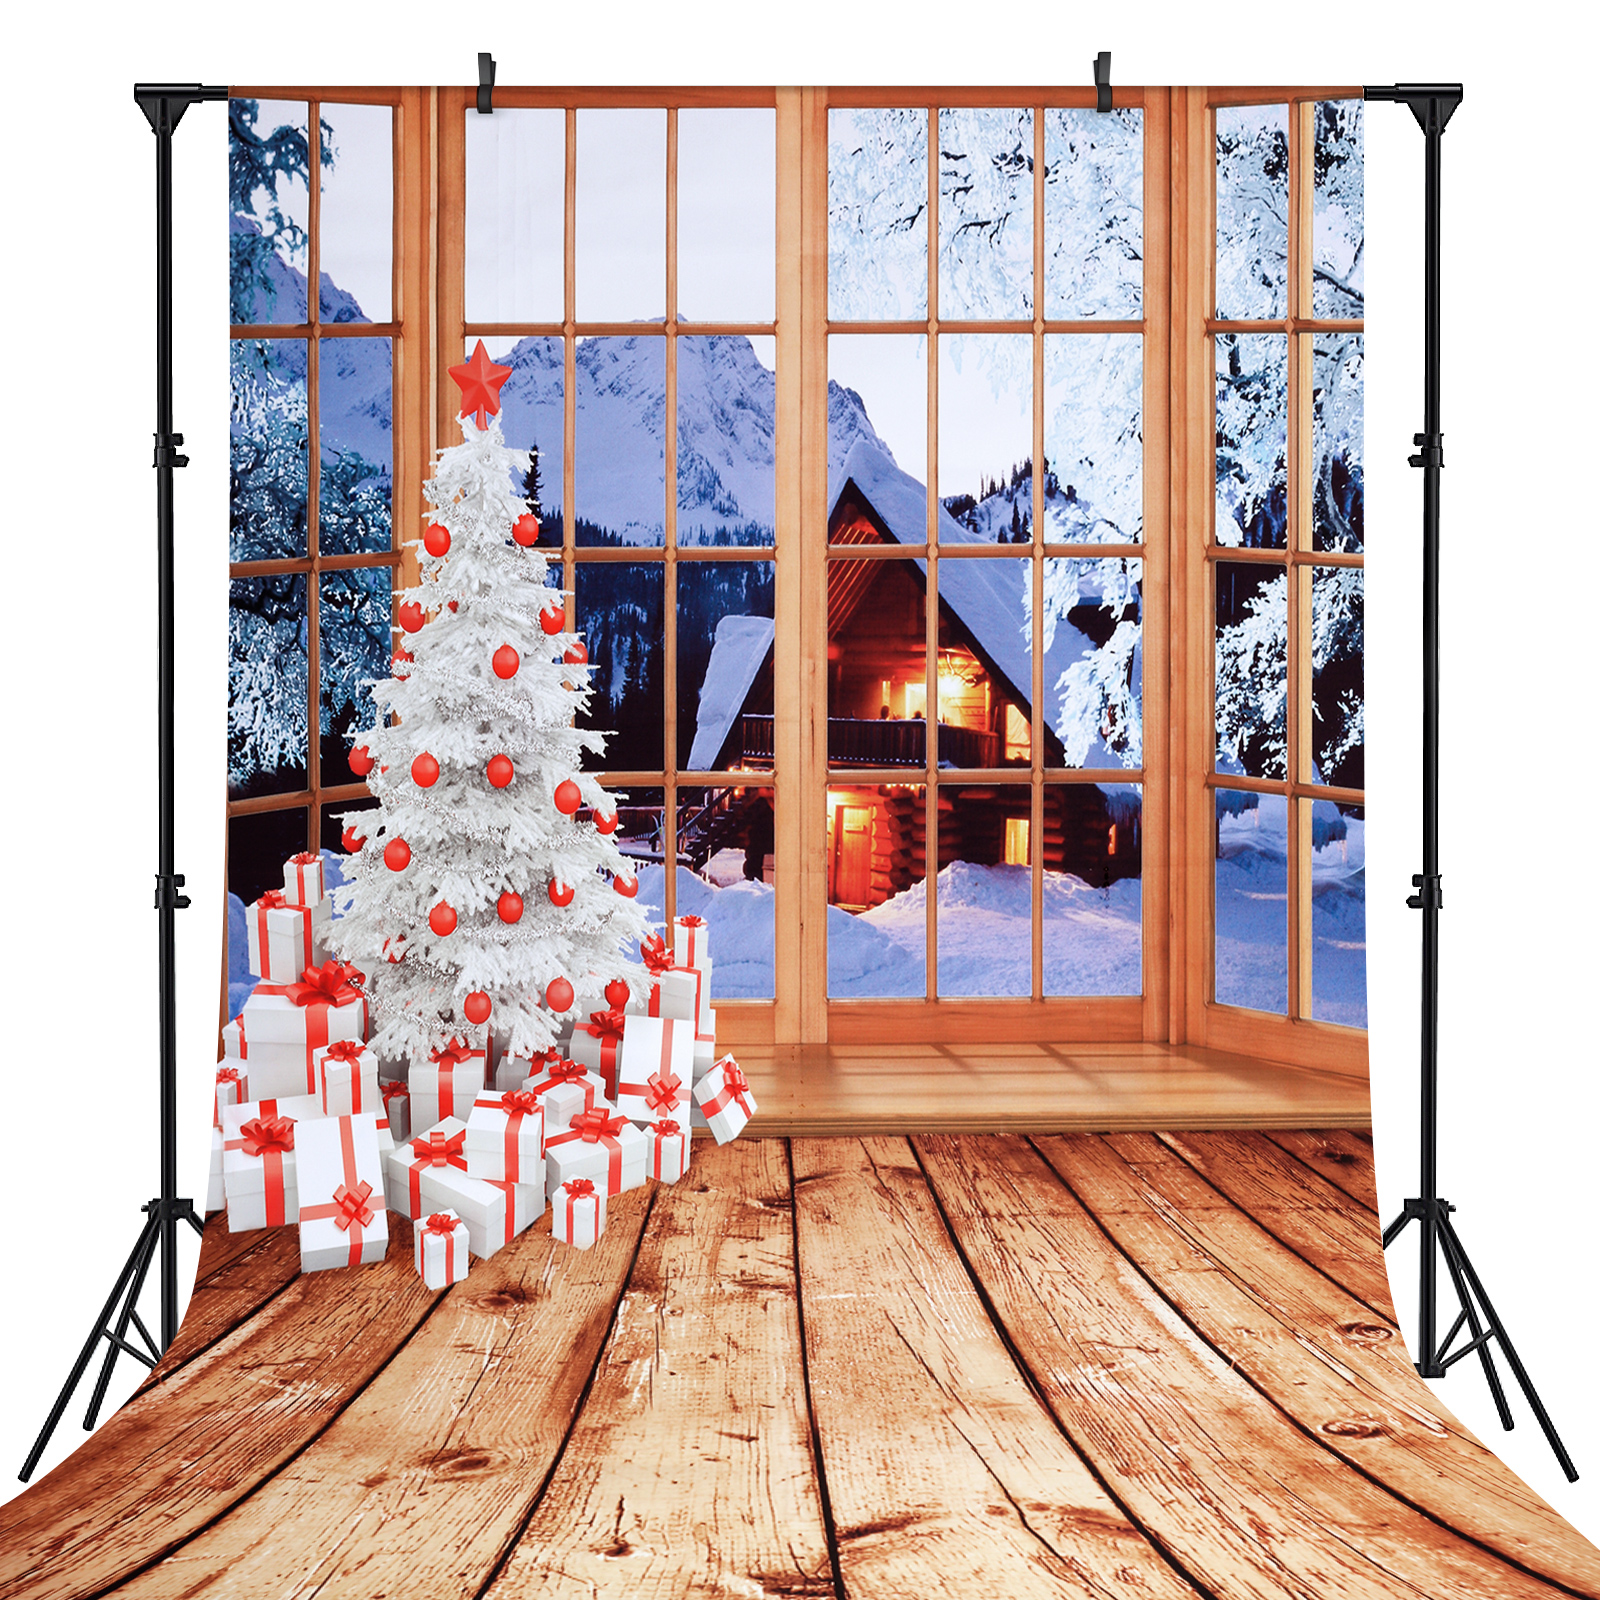 Mohoo-5x7ft-15x21m-Christmas-Backdrop-Photo-Window-Backdrop-with-Wooden-Floor-Christmas-Tree-Snow-Co-1958159-1